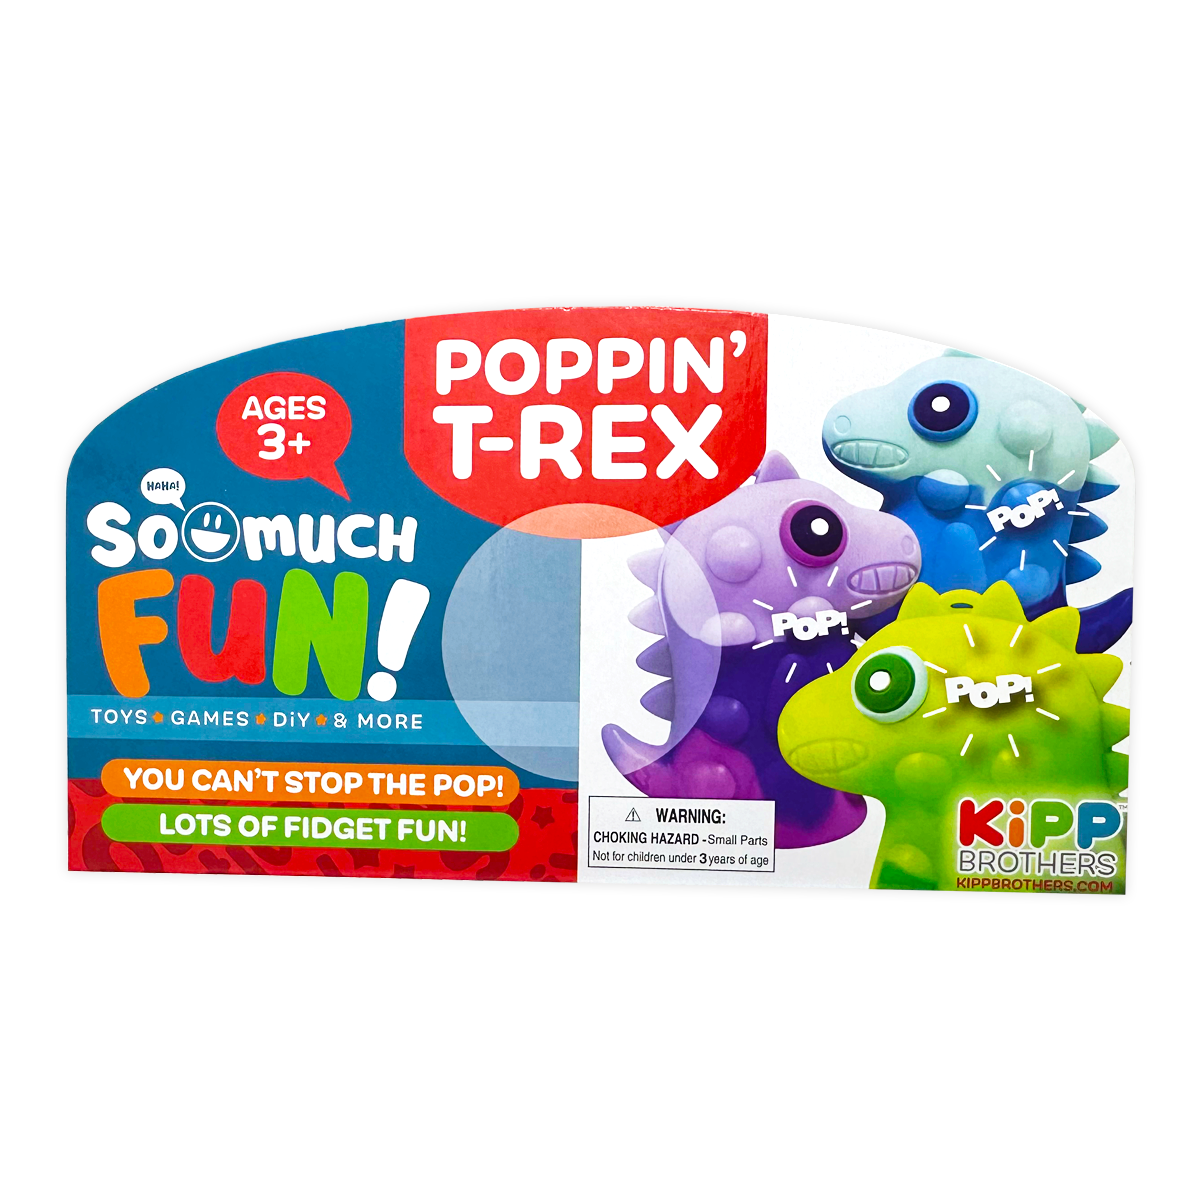 WHOLESALE POPPIN' T-REX BALL 12 PIECES PER DISPLAY 25006